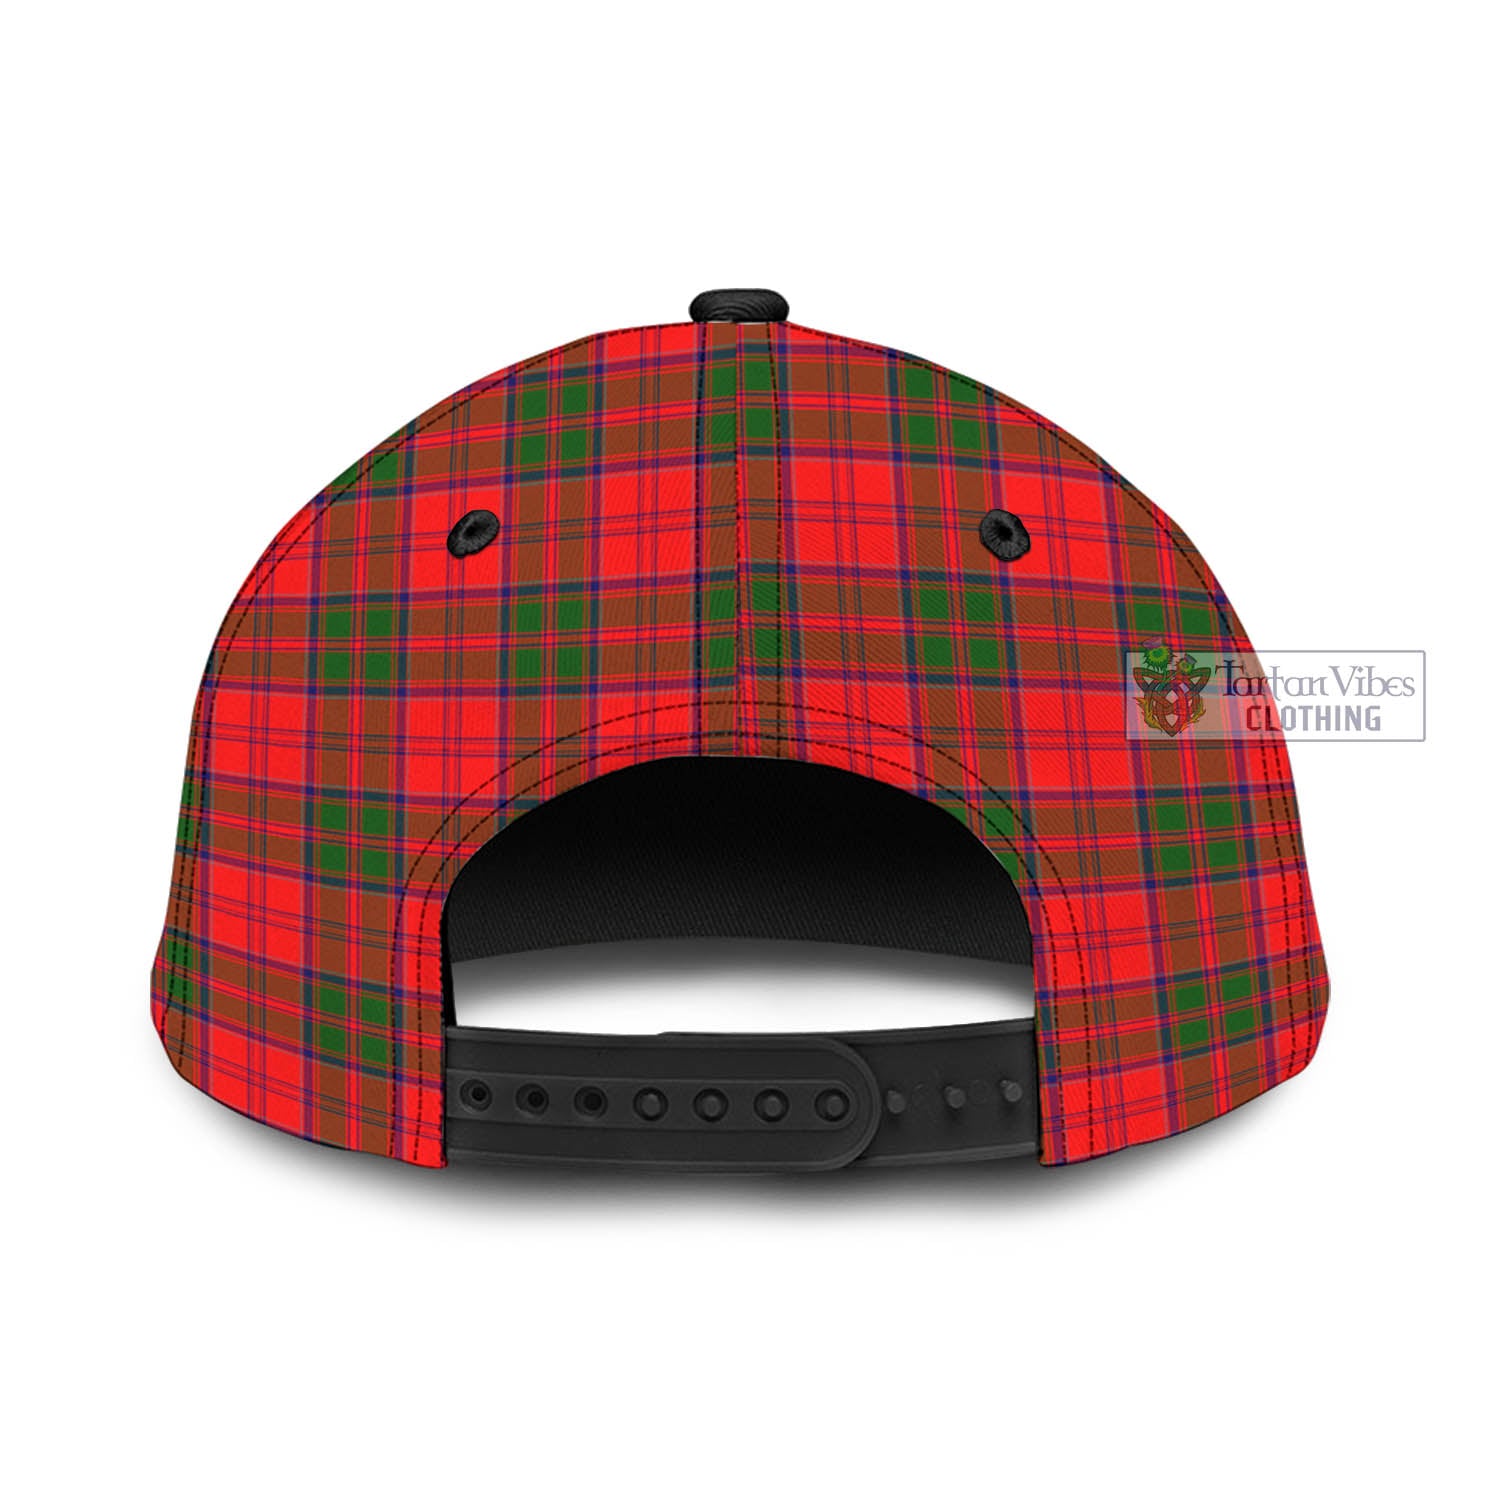 Tartan Vibes Clothing Heron Tartan Classic Cap with Family Crest In Me Style